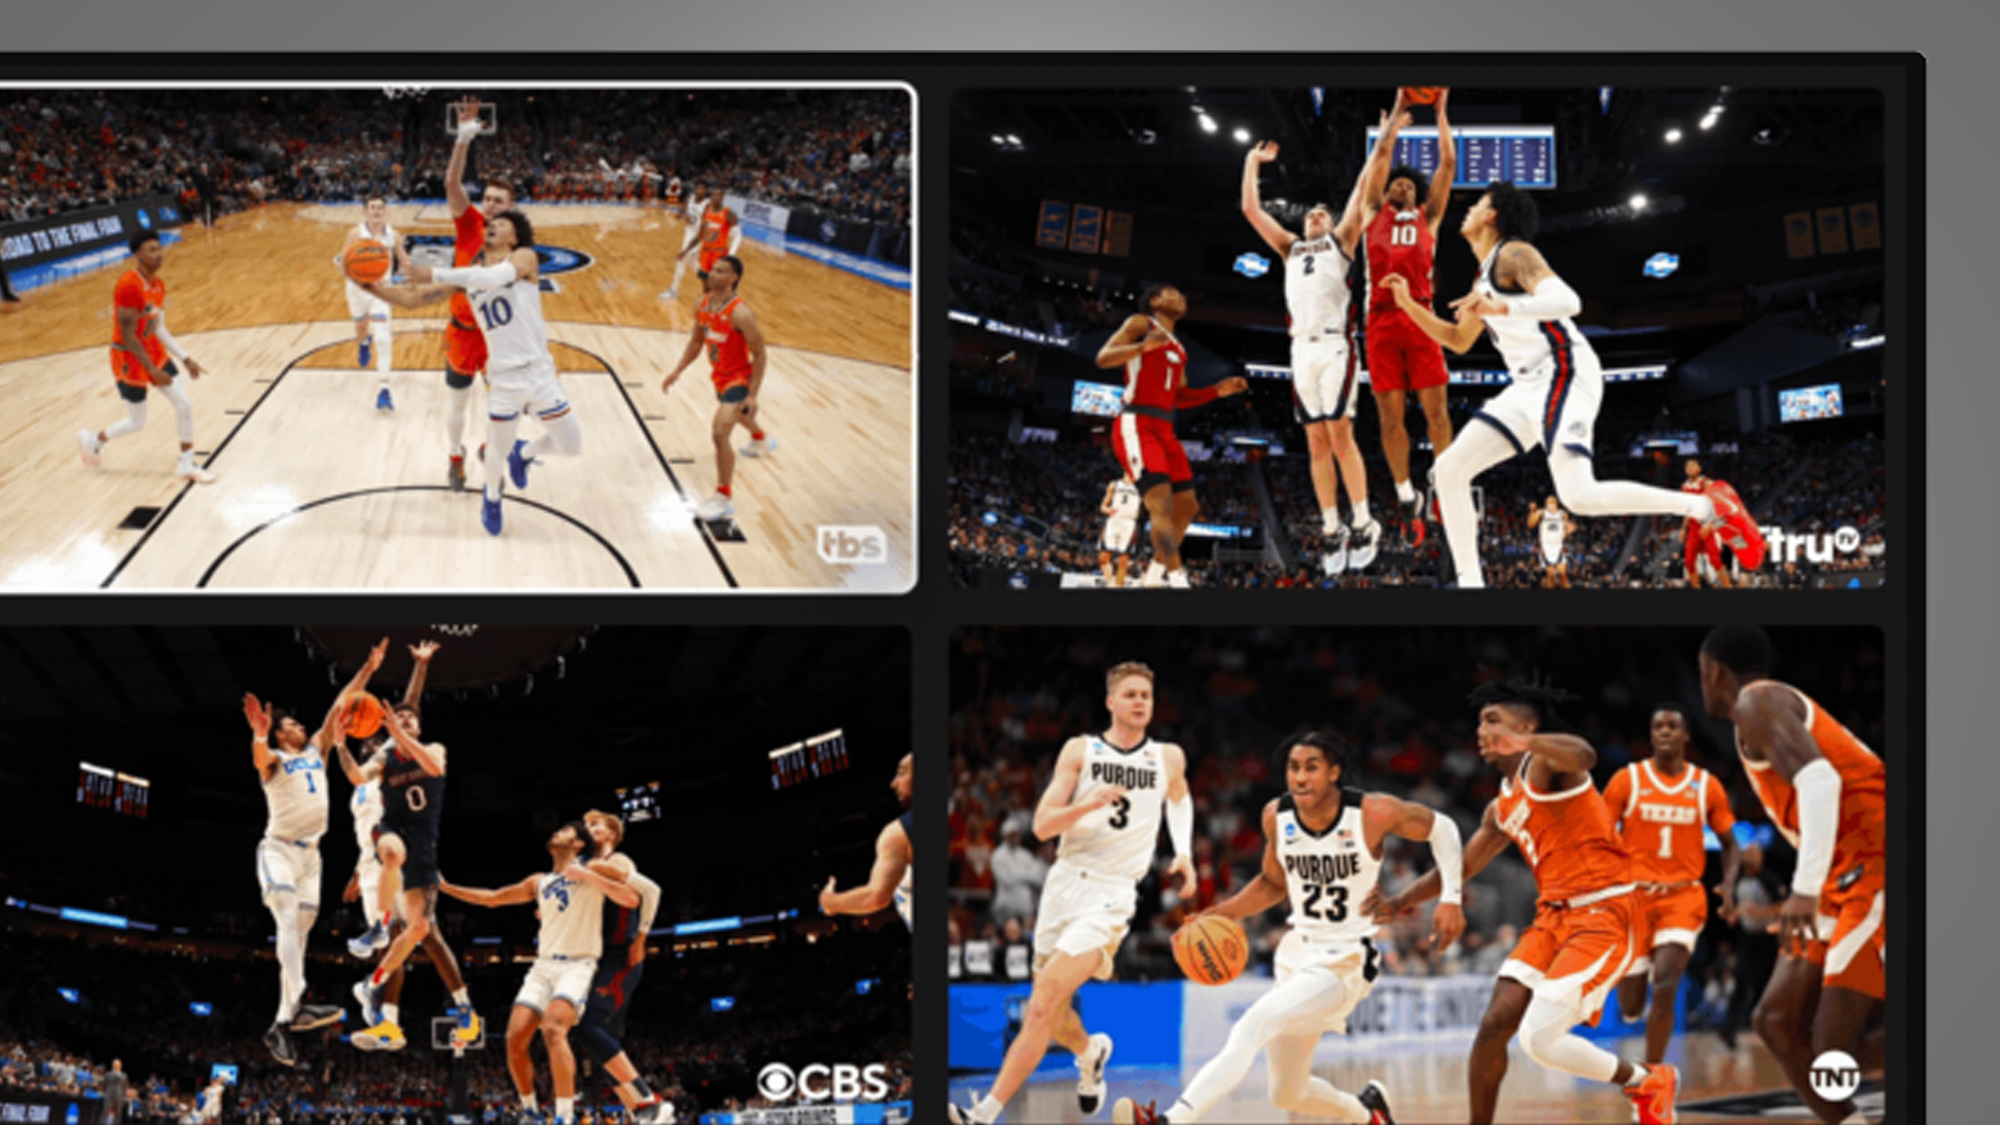 TV screen with gray background showing YouTube TV multiview during basketball